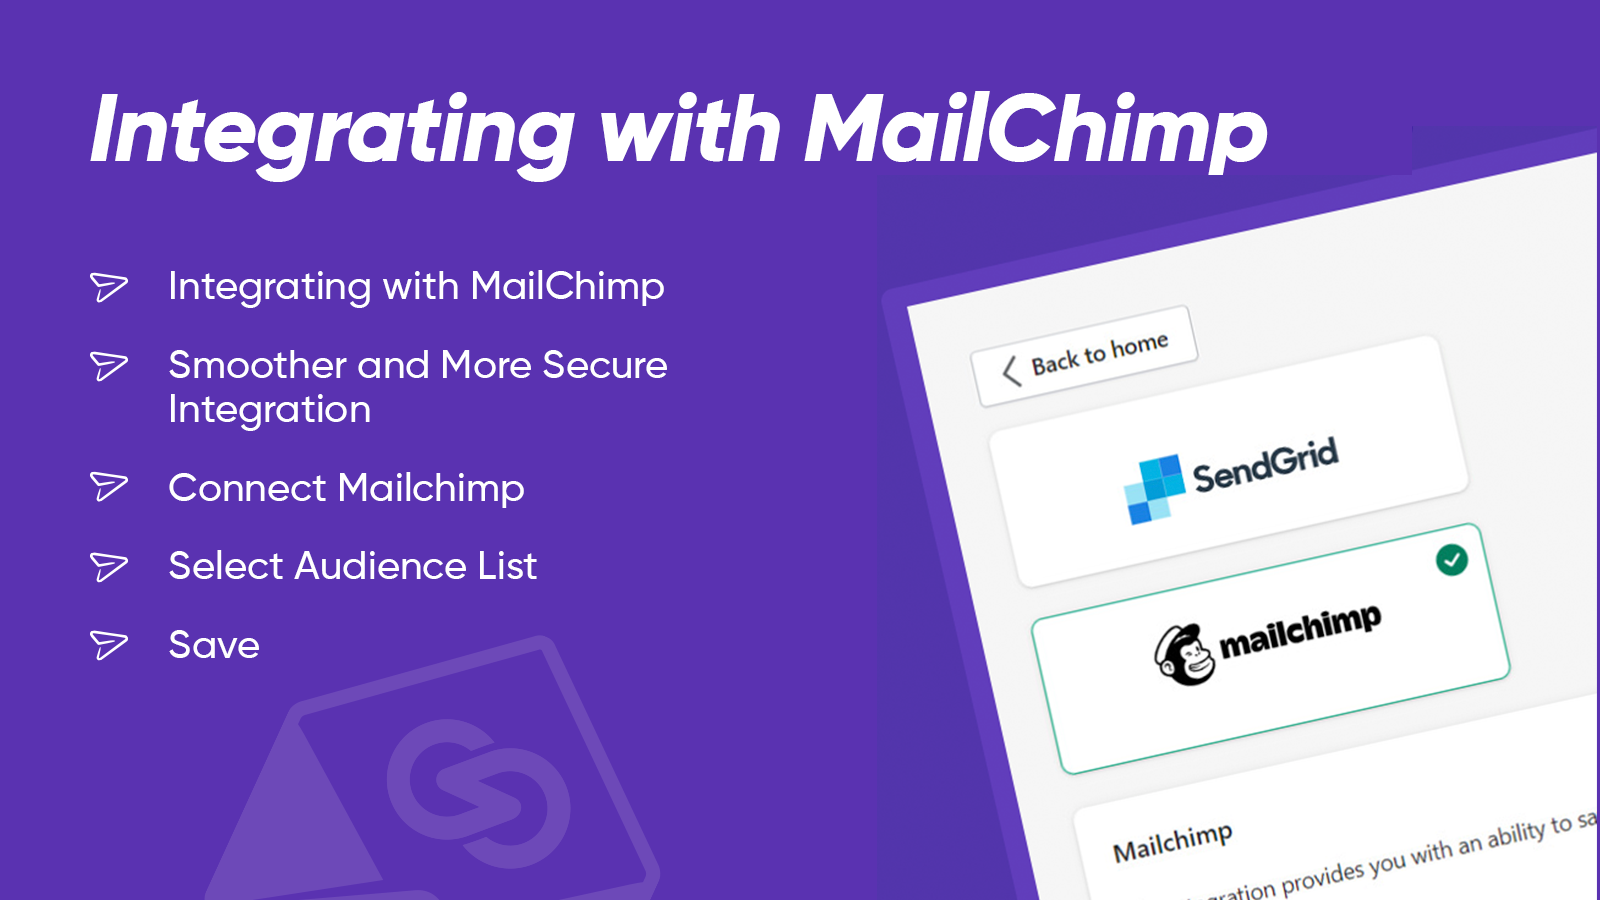 Integrating with MailChimp